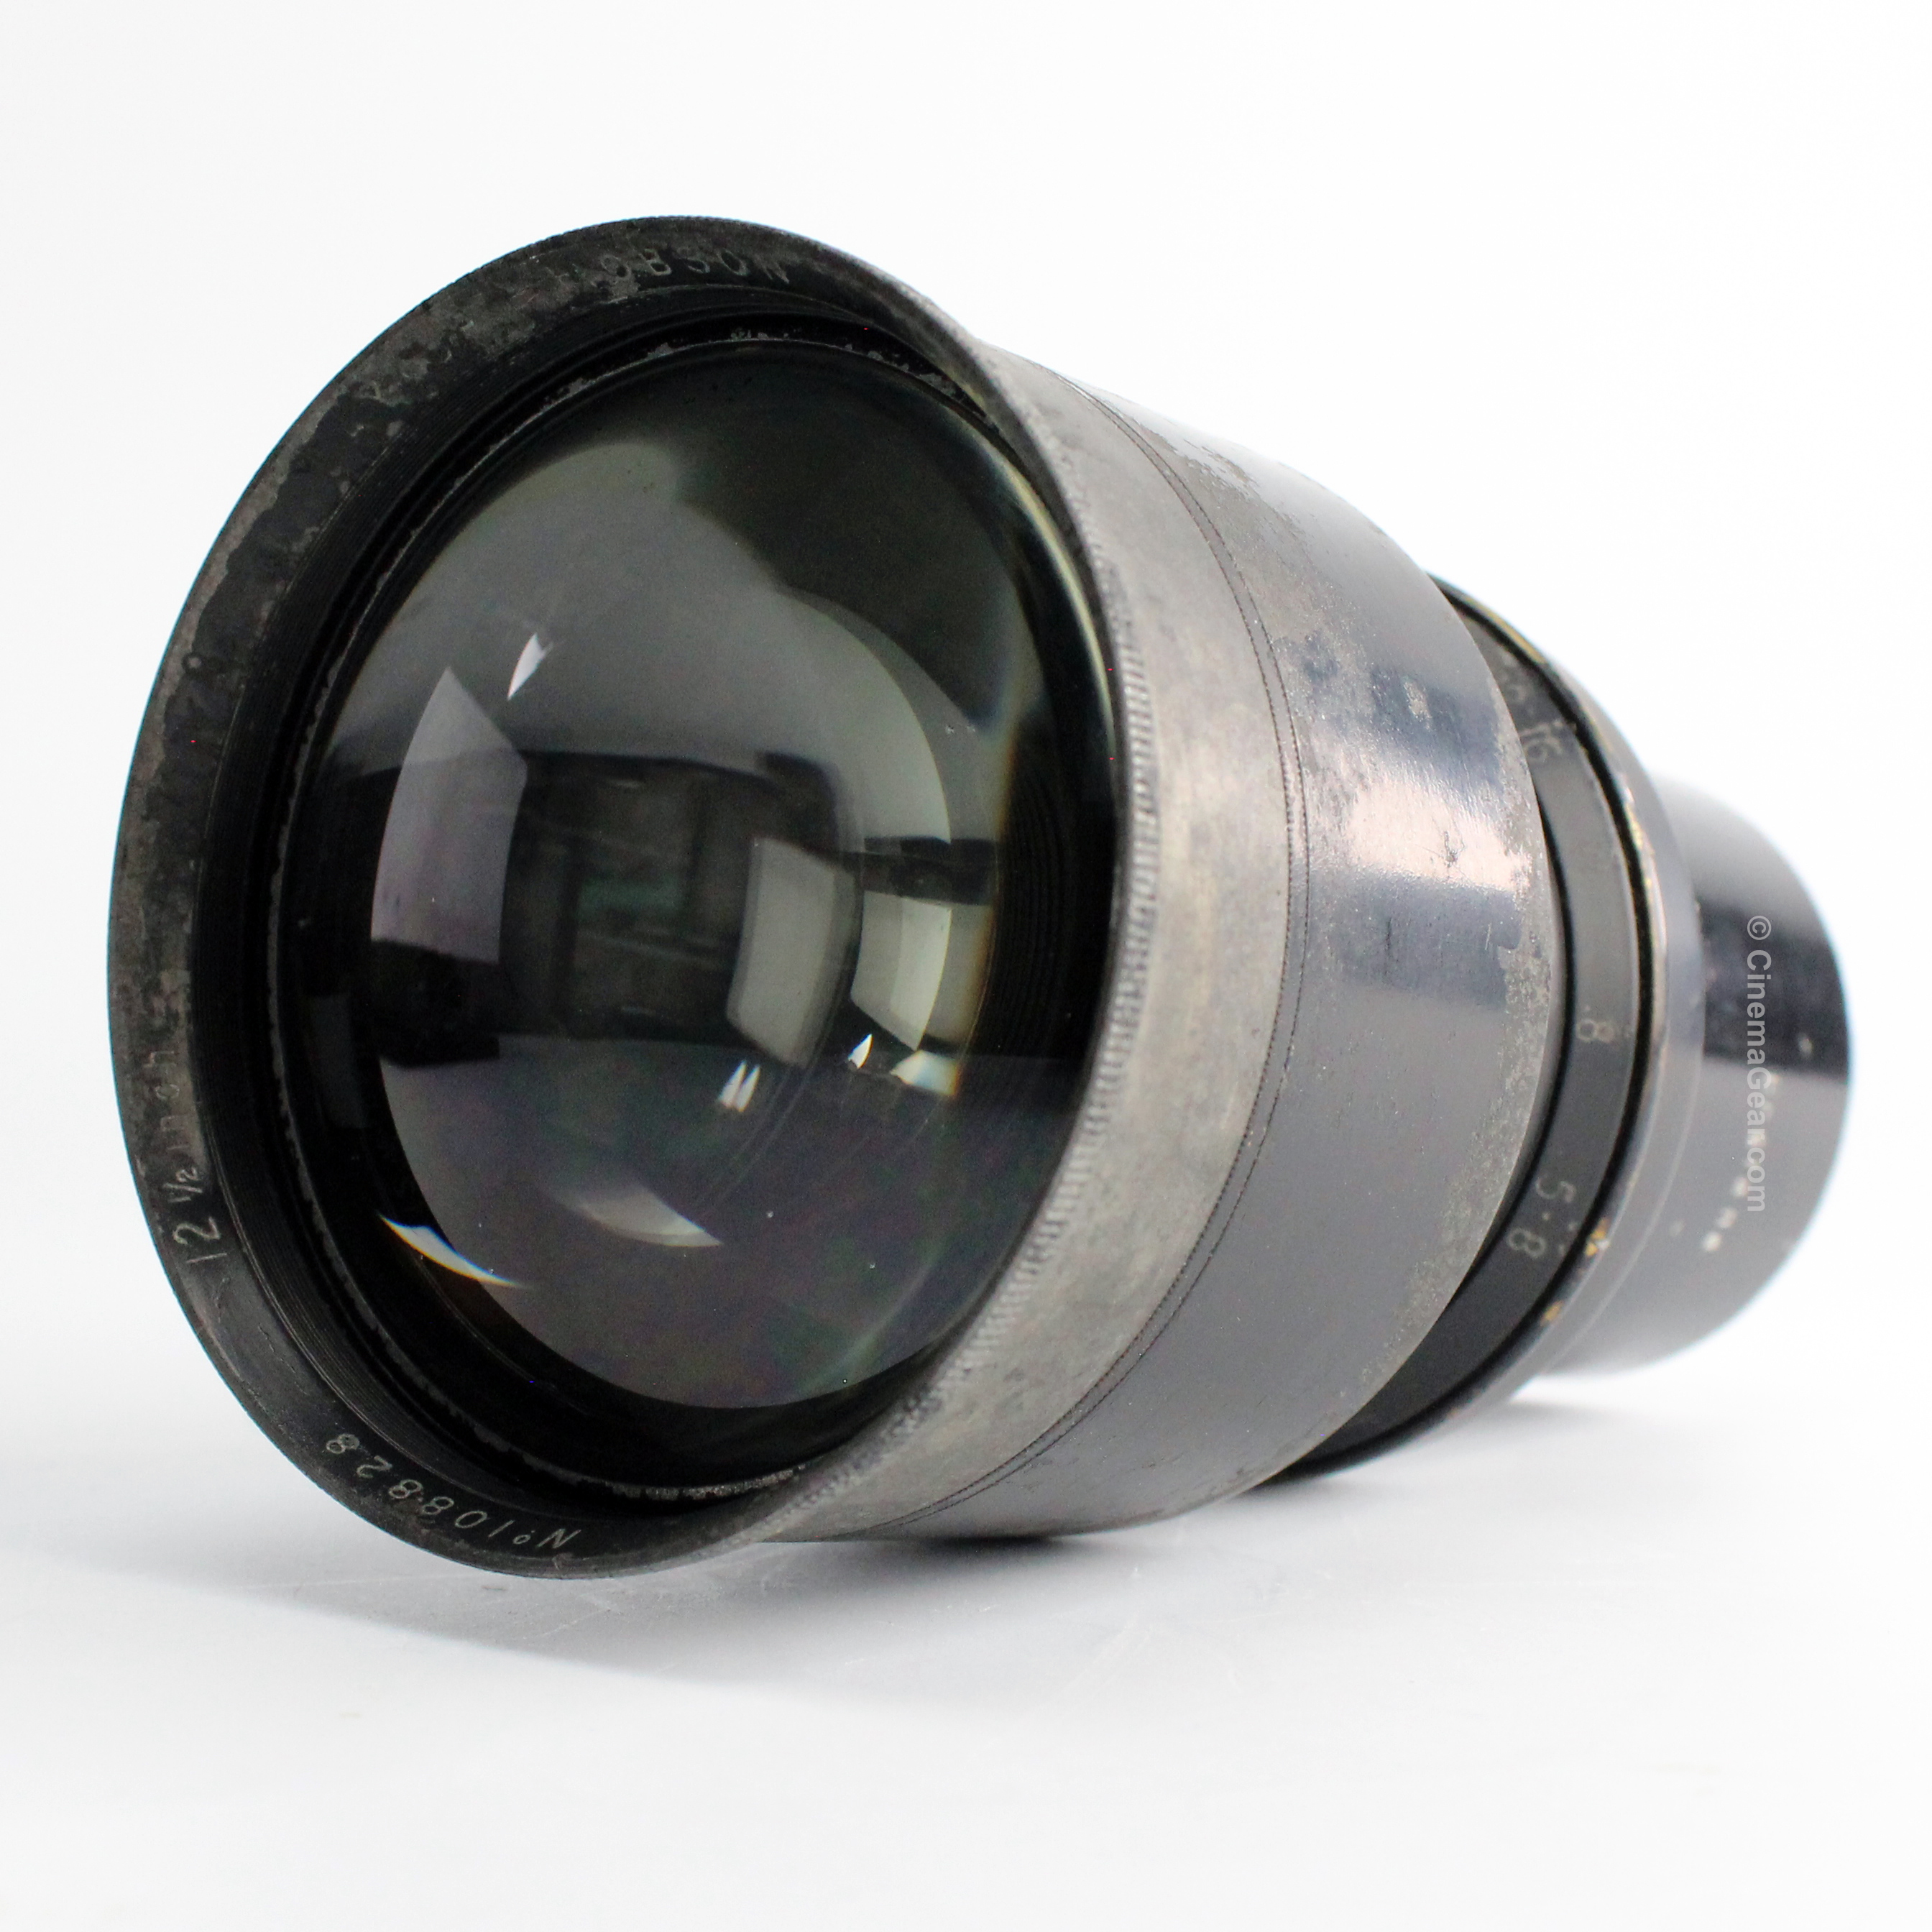 T.H. Cooke Telephoto 12.5in f4.8 lens cell (no mount).